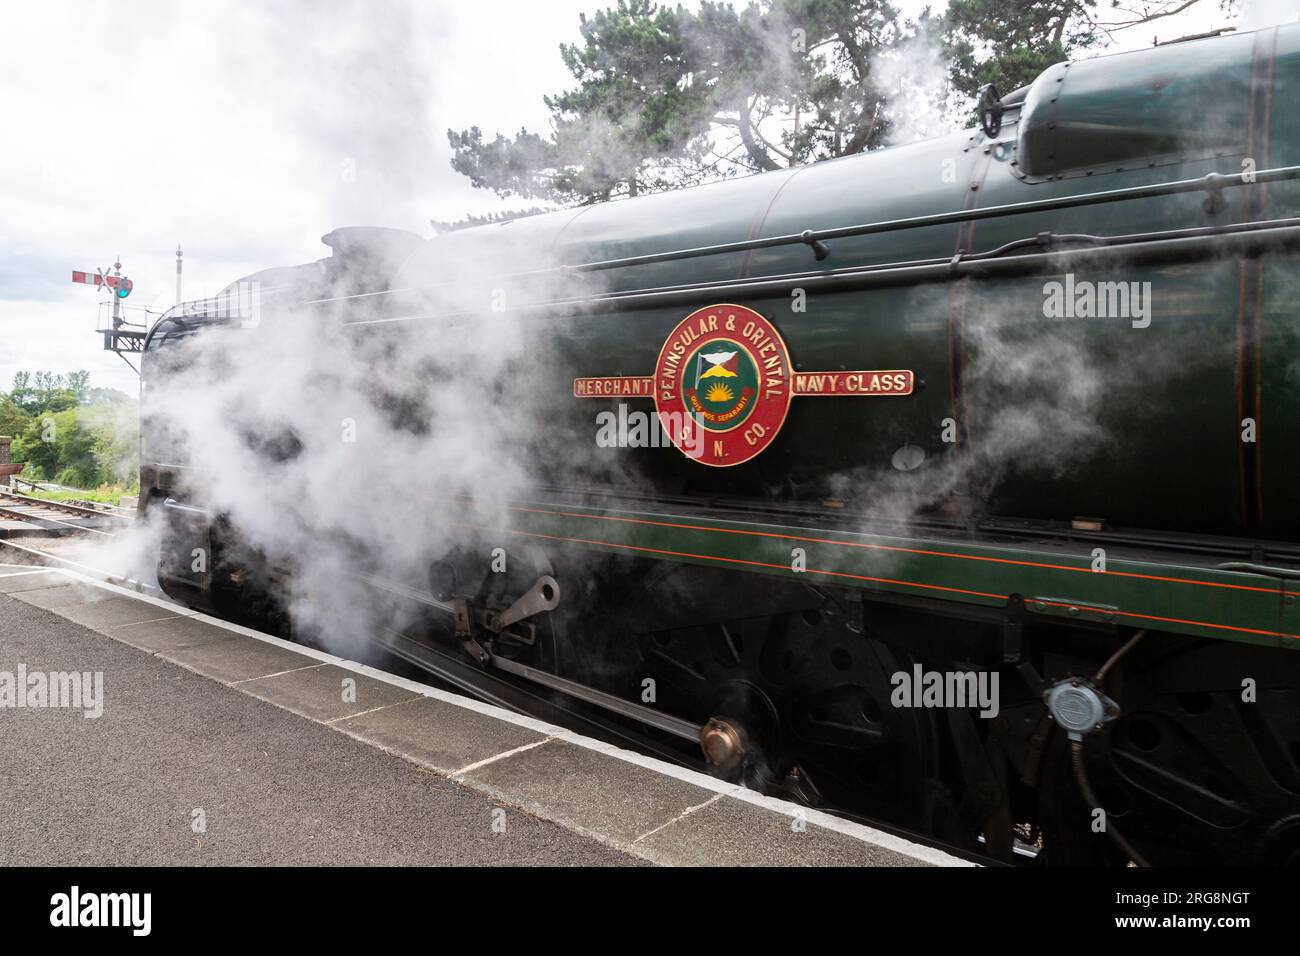 Merchant Navy Class 35002 'Peninsula and Oriental' steam locomotive preserved by the Gloucestershire and Warwickshire Steam Railway, letting off steam Stock Photo